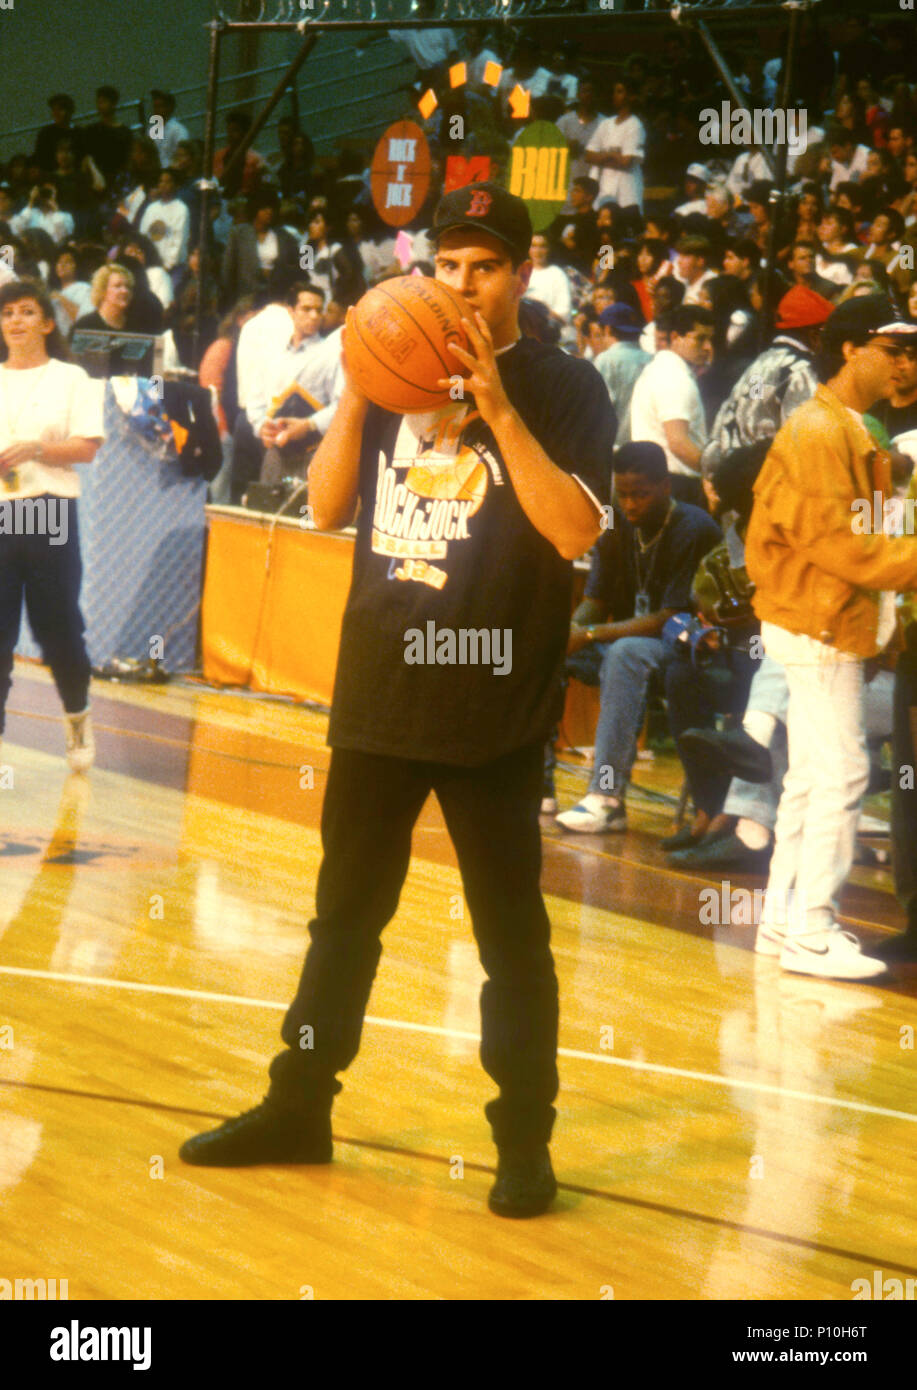 LOS ANGELES, CA - SEPTEMBER 15: Singer Jordan Knight of New Kids On The Block attends MTV's First Annual Rock 'N Jock Basketball Game on September 15, 1991 at Loyola Marymount University in Los Angeles, California. Photo by Barry King/Alamy Stock Photo Stock Photo